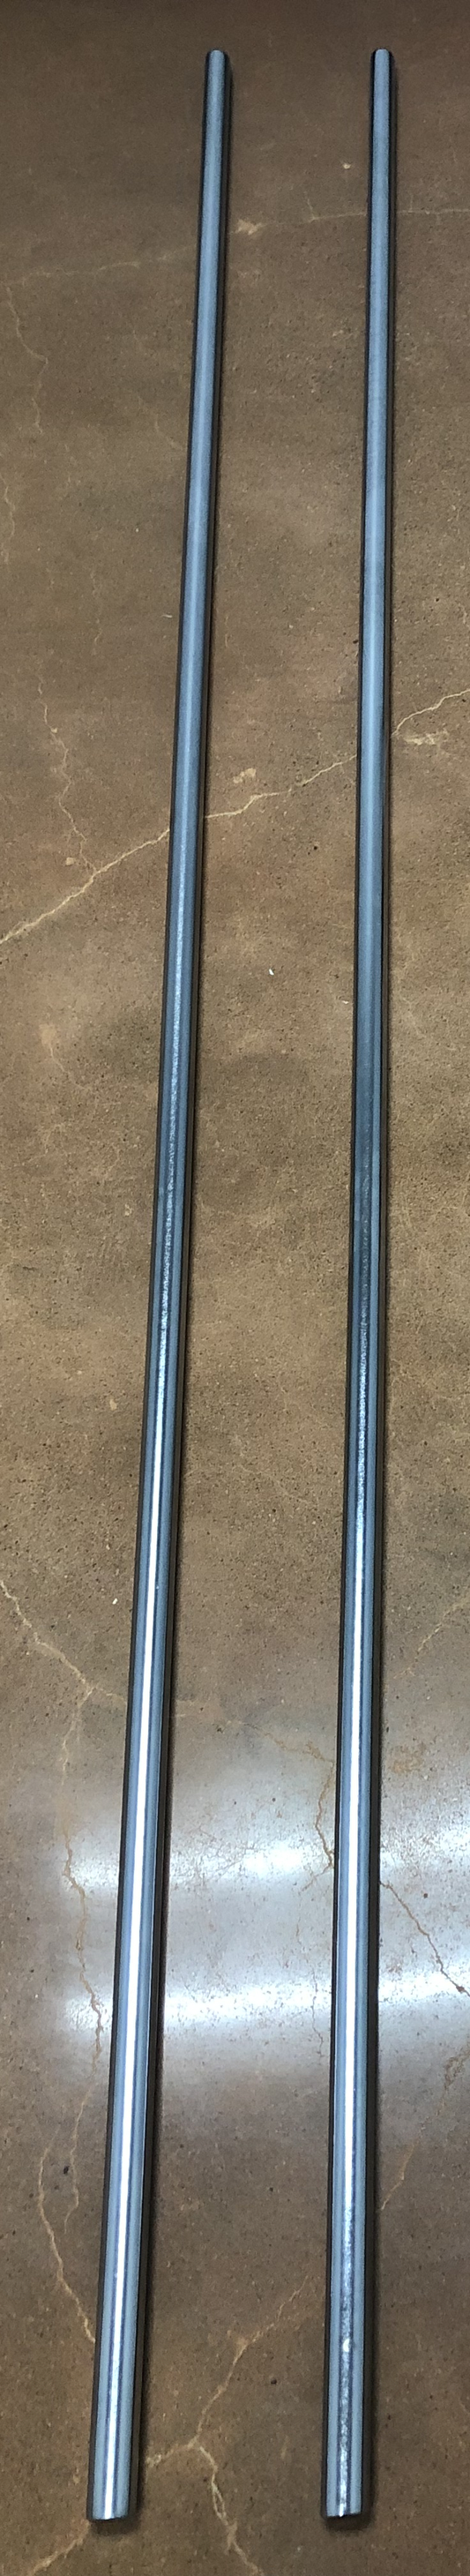 Solid Guide Rod 7' X 3/4"--Pair